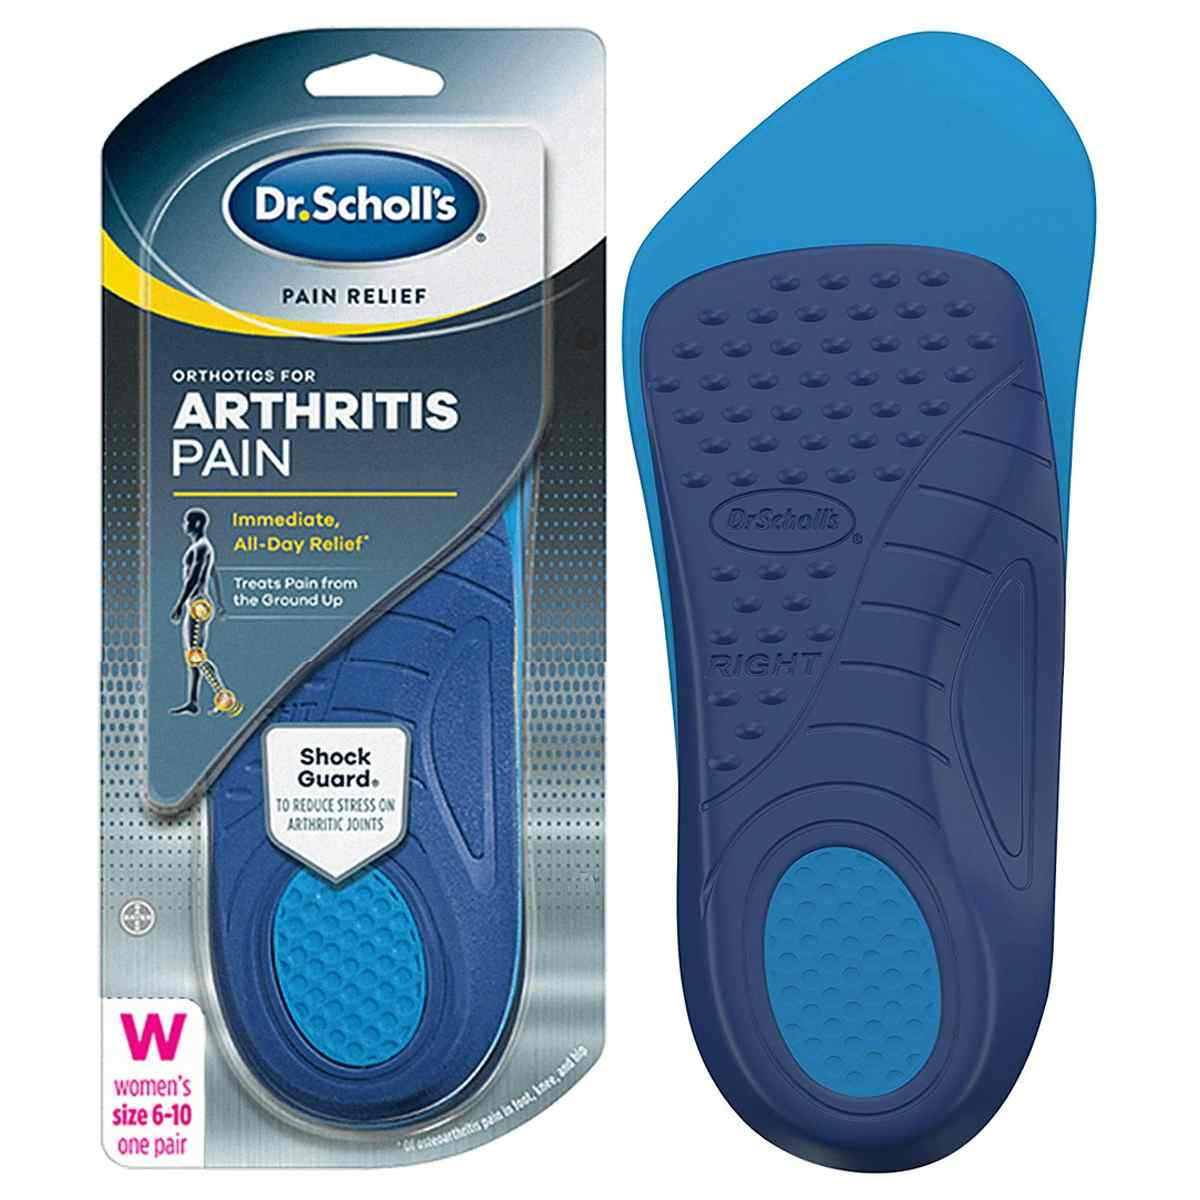 Dr. Scholl's Pain Relief Orthotics for Arthritis Pain, 85284665, Women's (Size 6-10) - Pack of 2